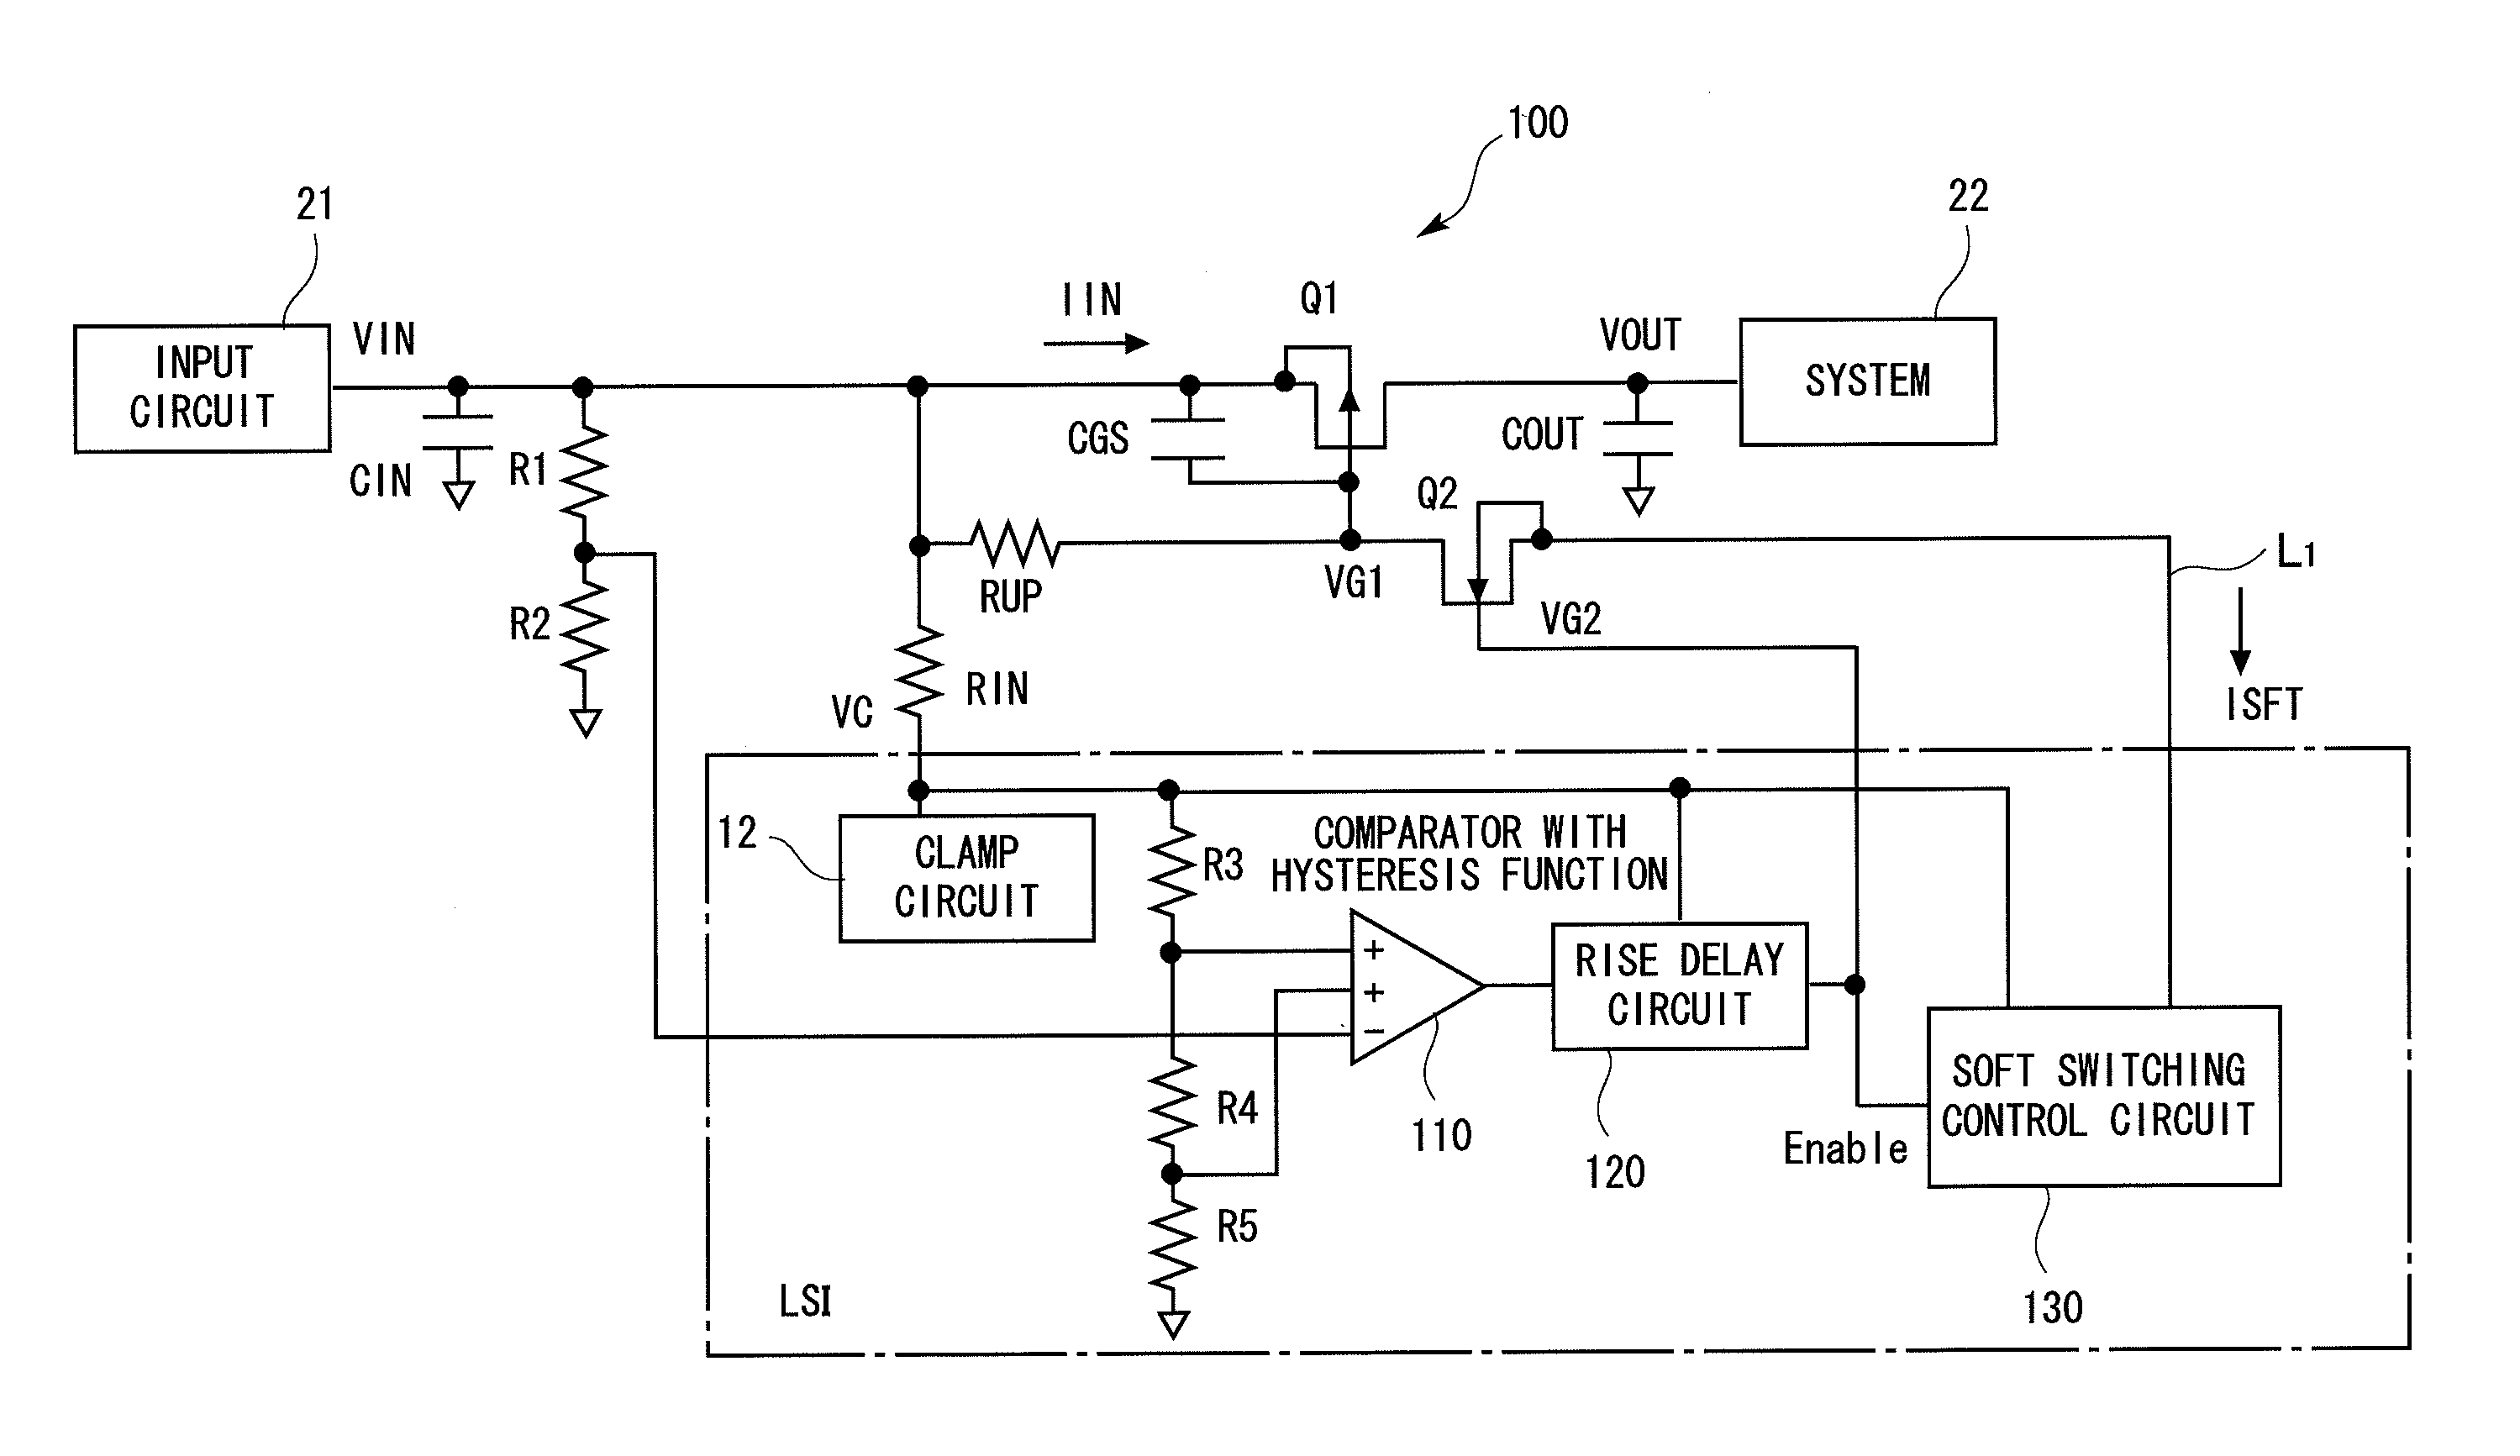 Input overvoltage protection circuit with soft-start function